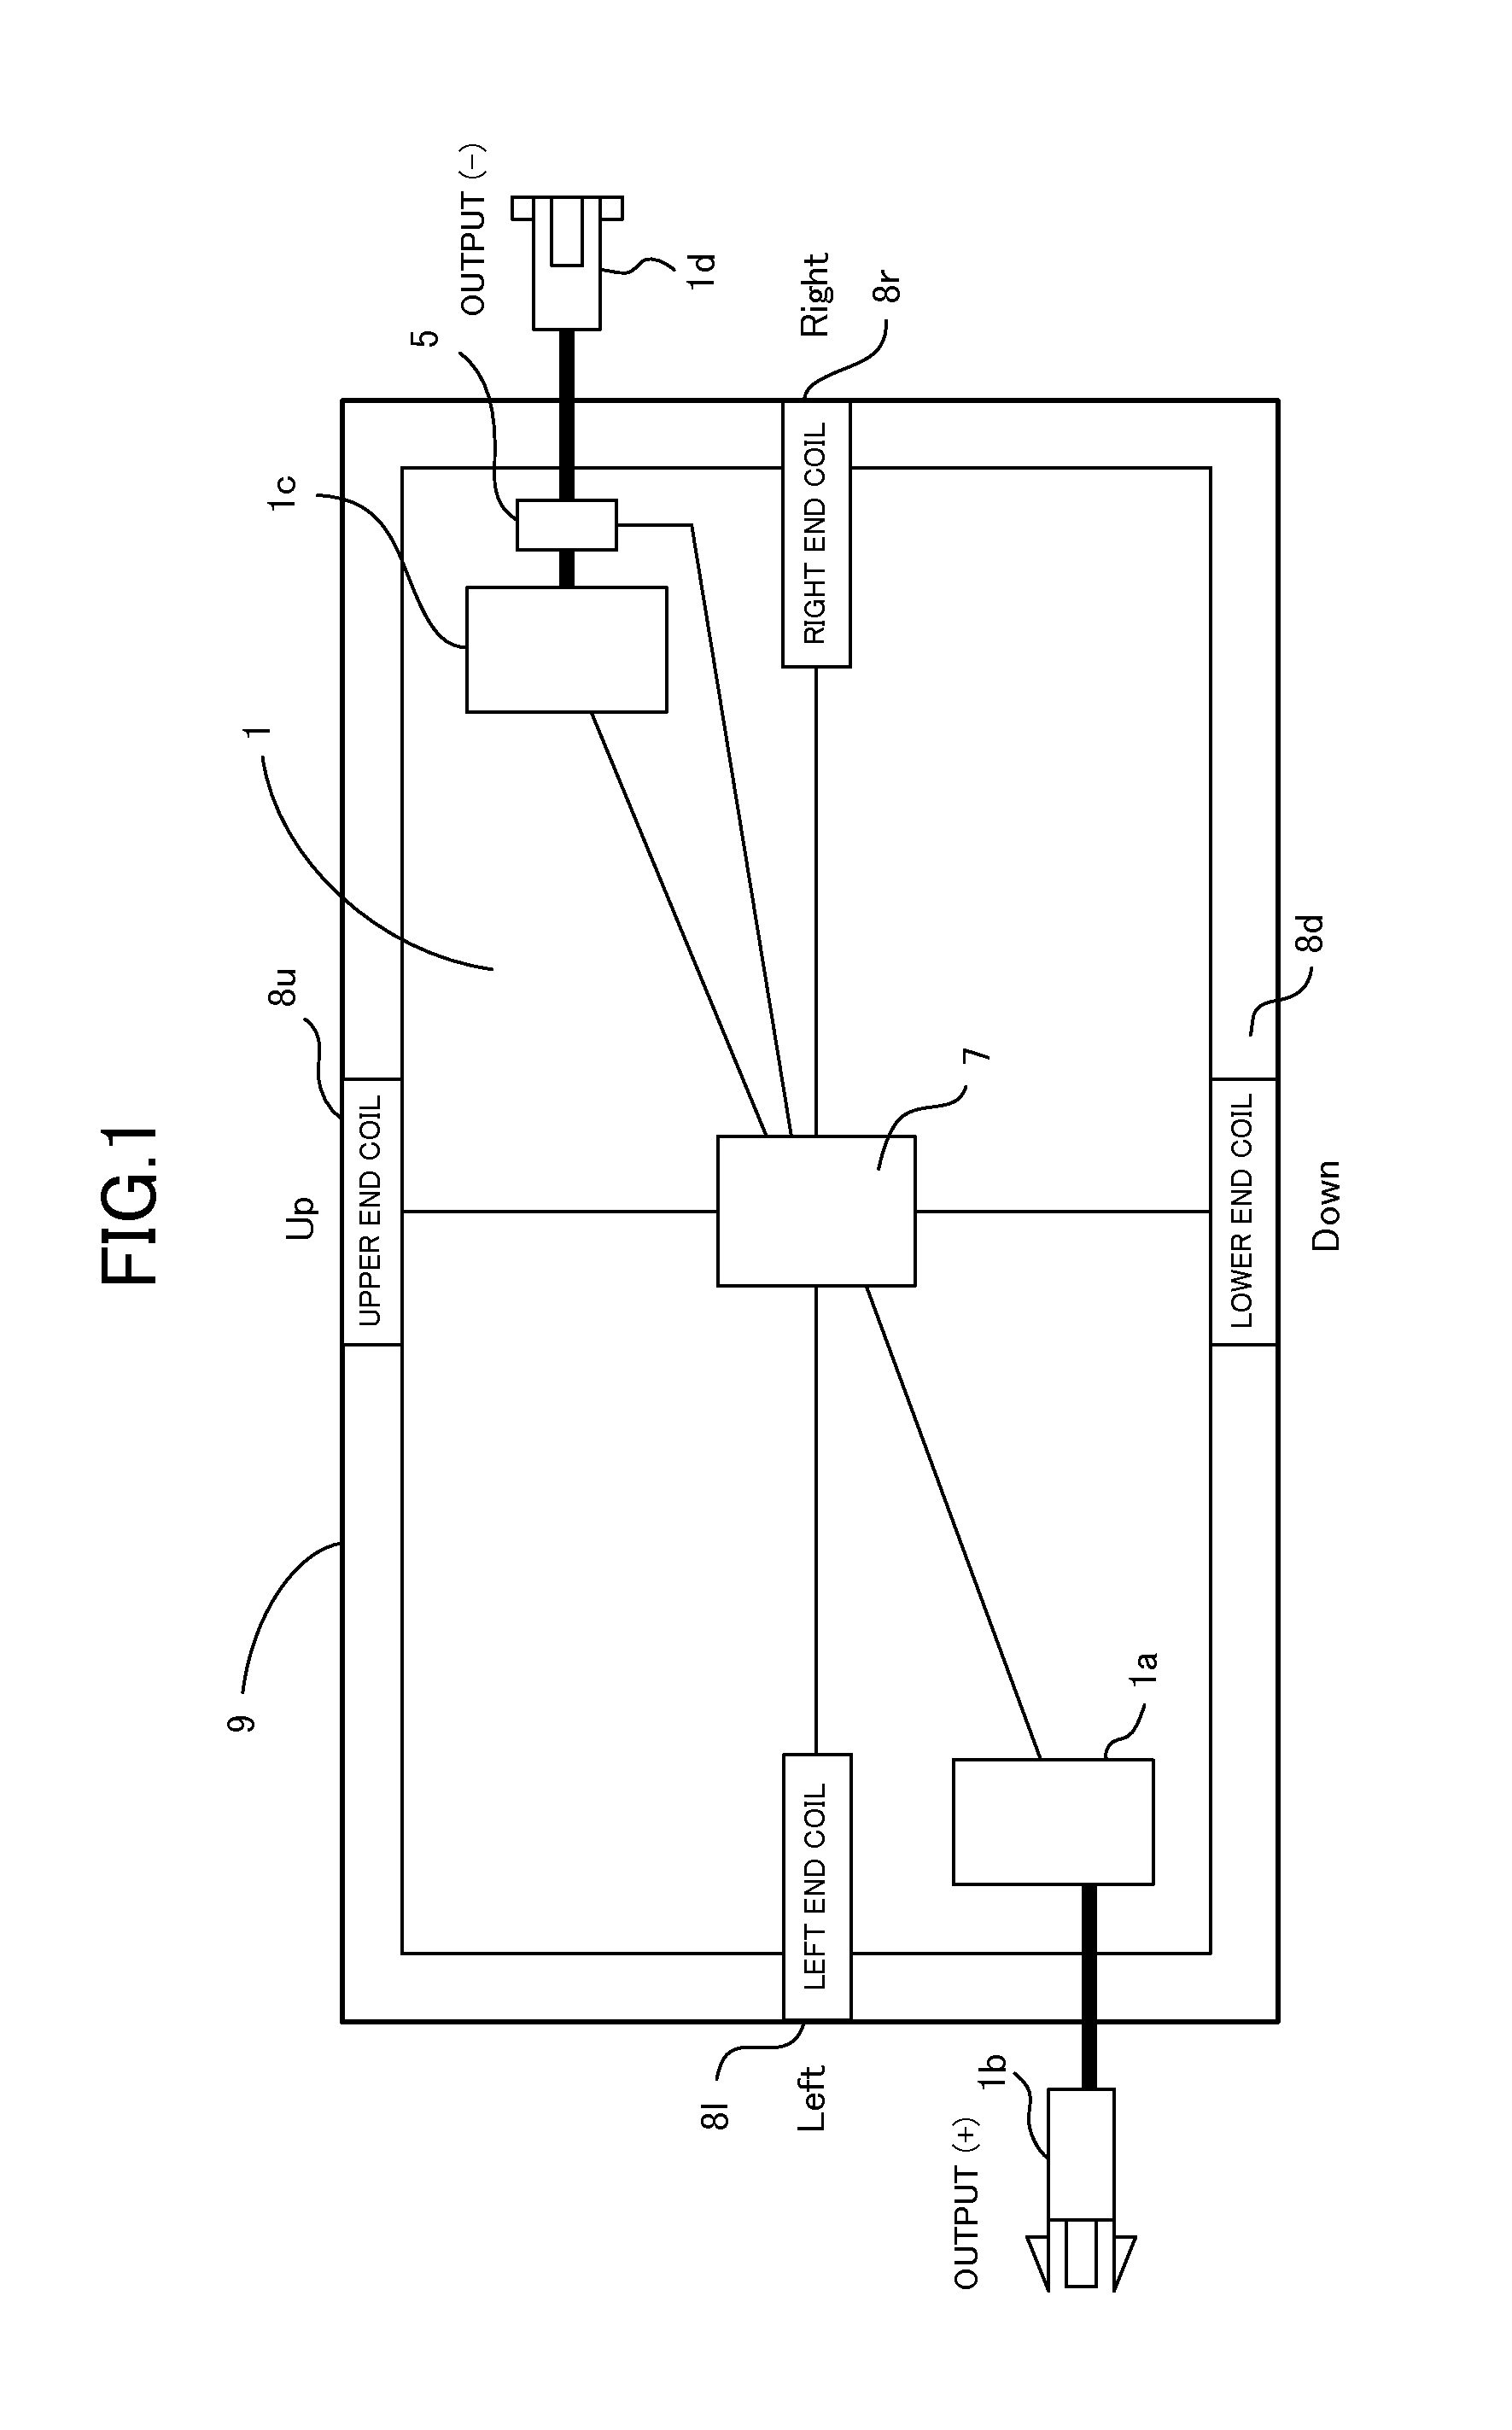 Solar photovoltaic panel and solar photovoltaic system